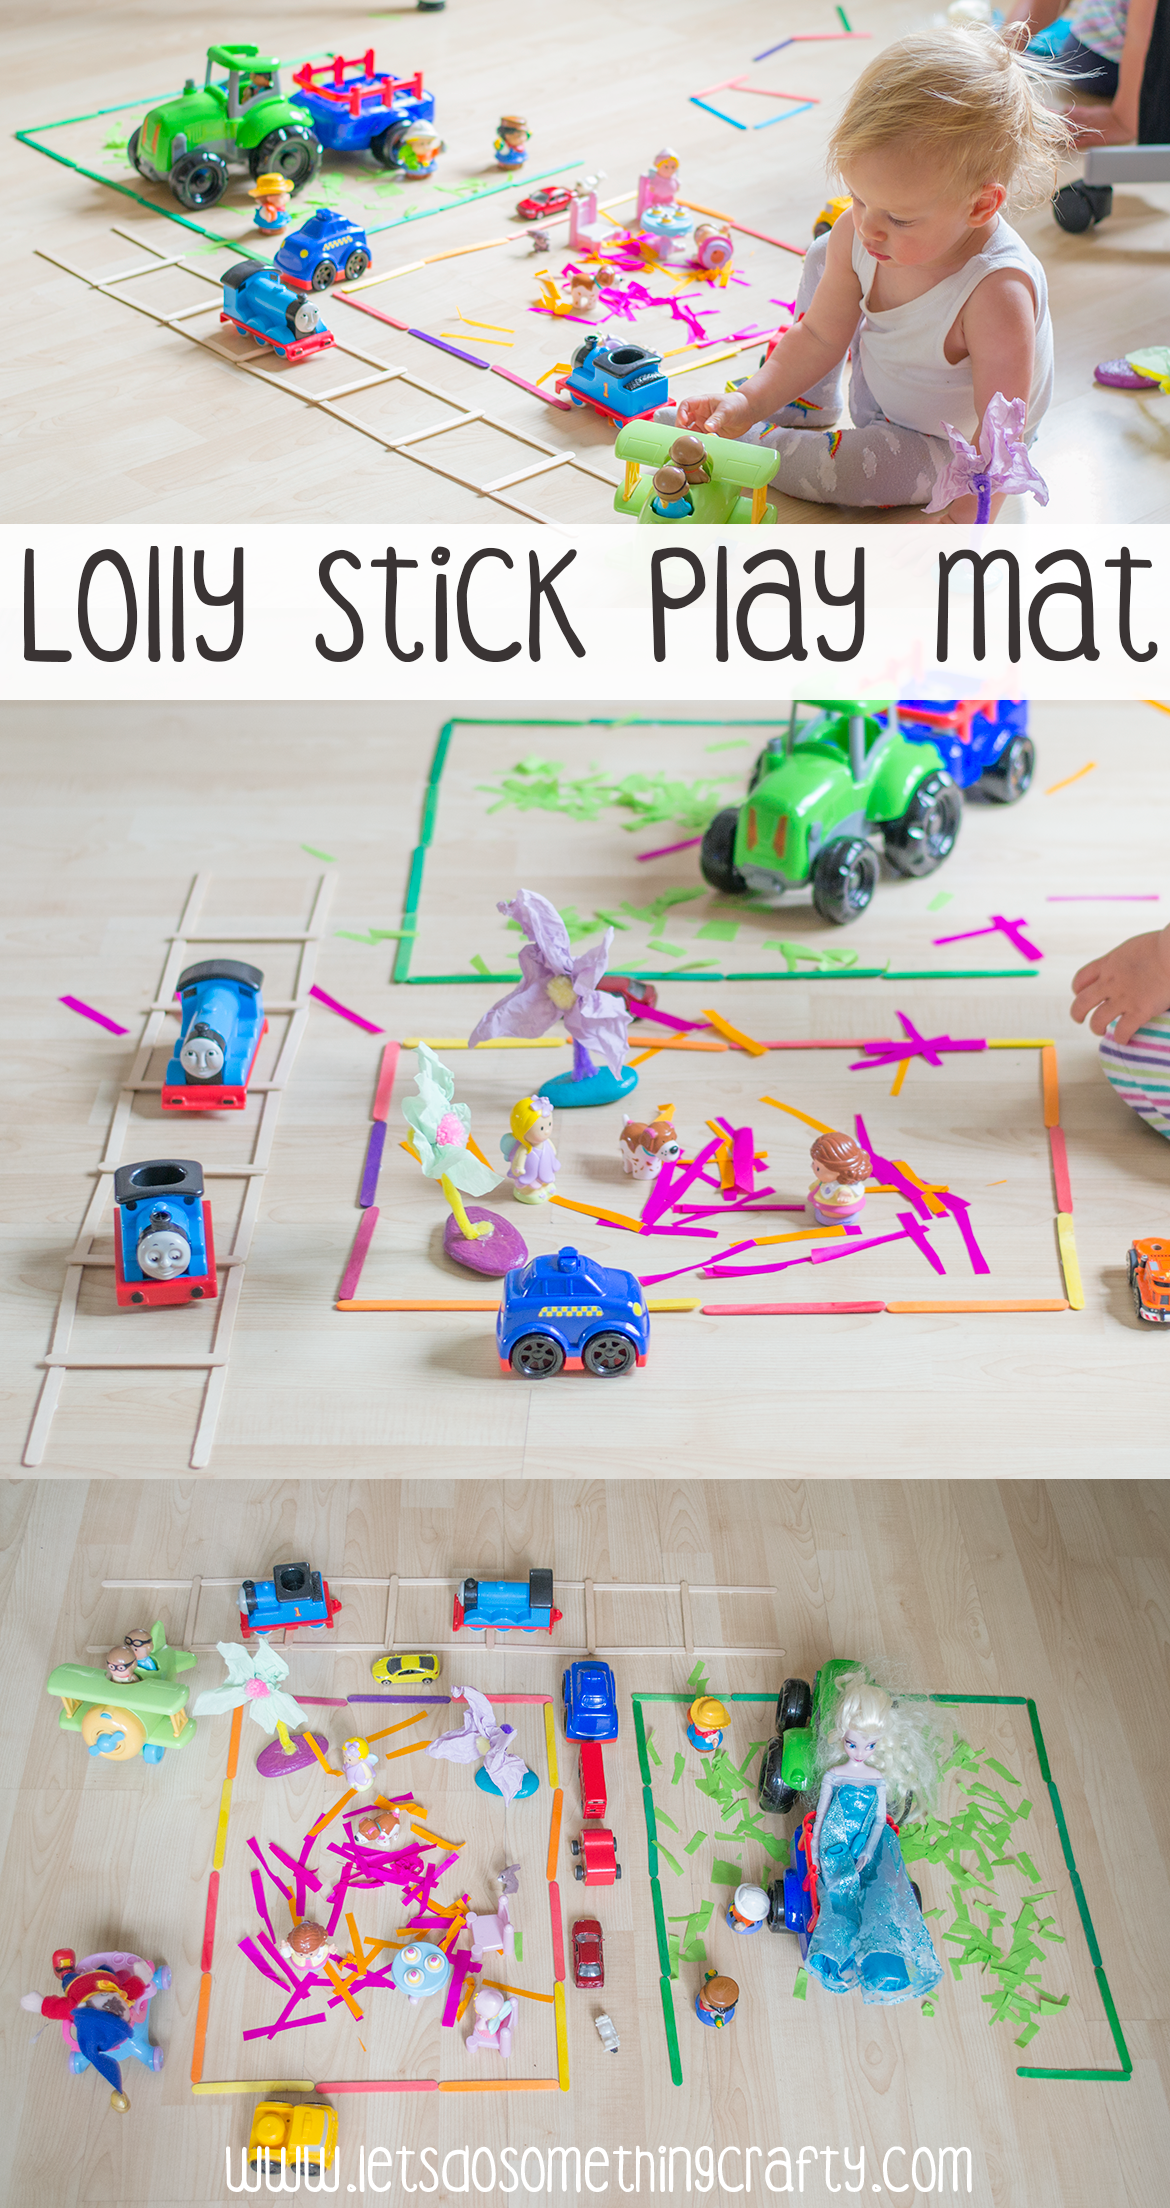 rainy day activities lolly stick play mat